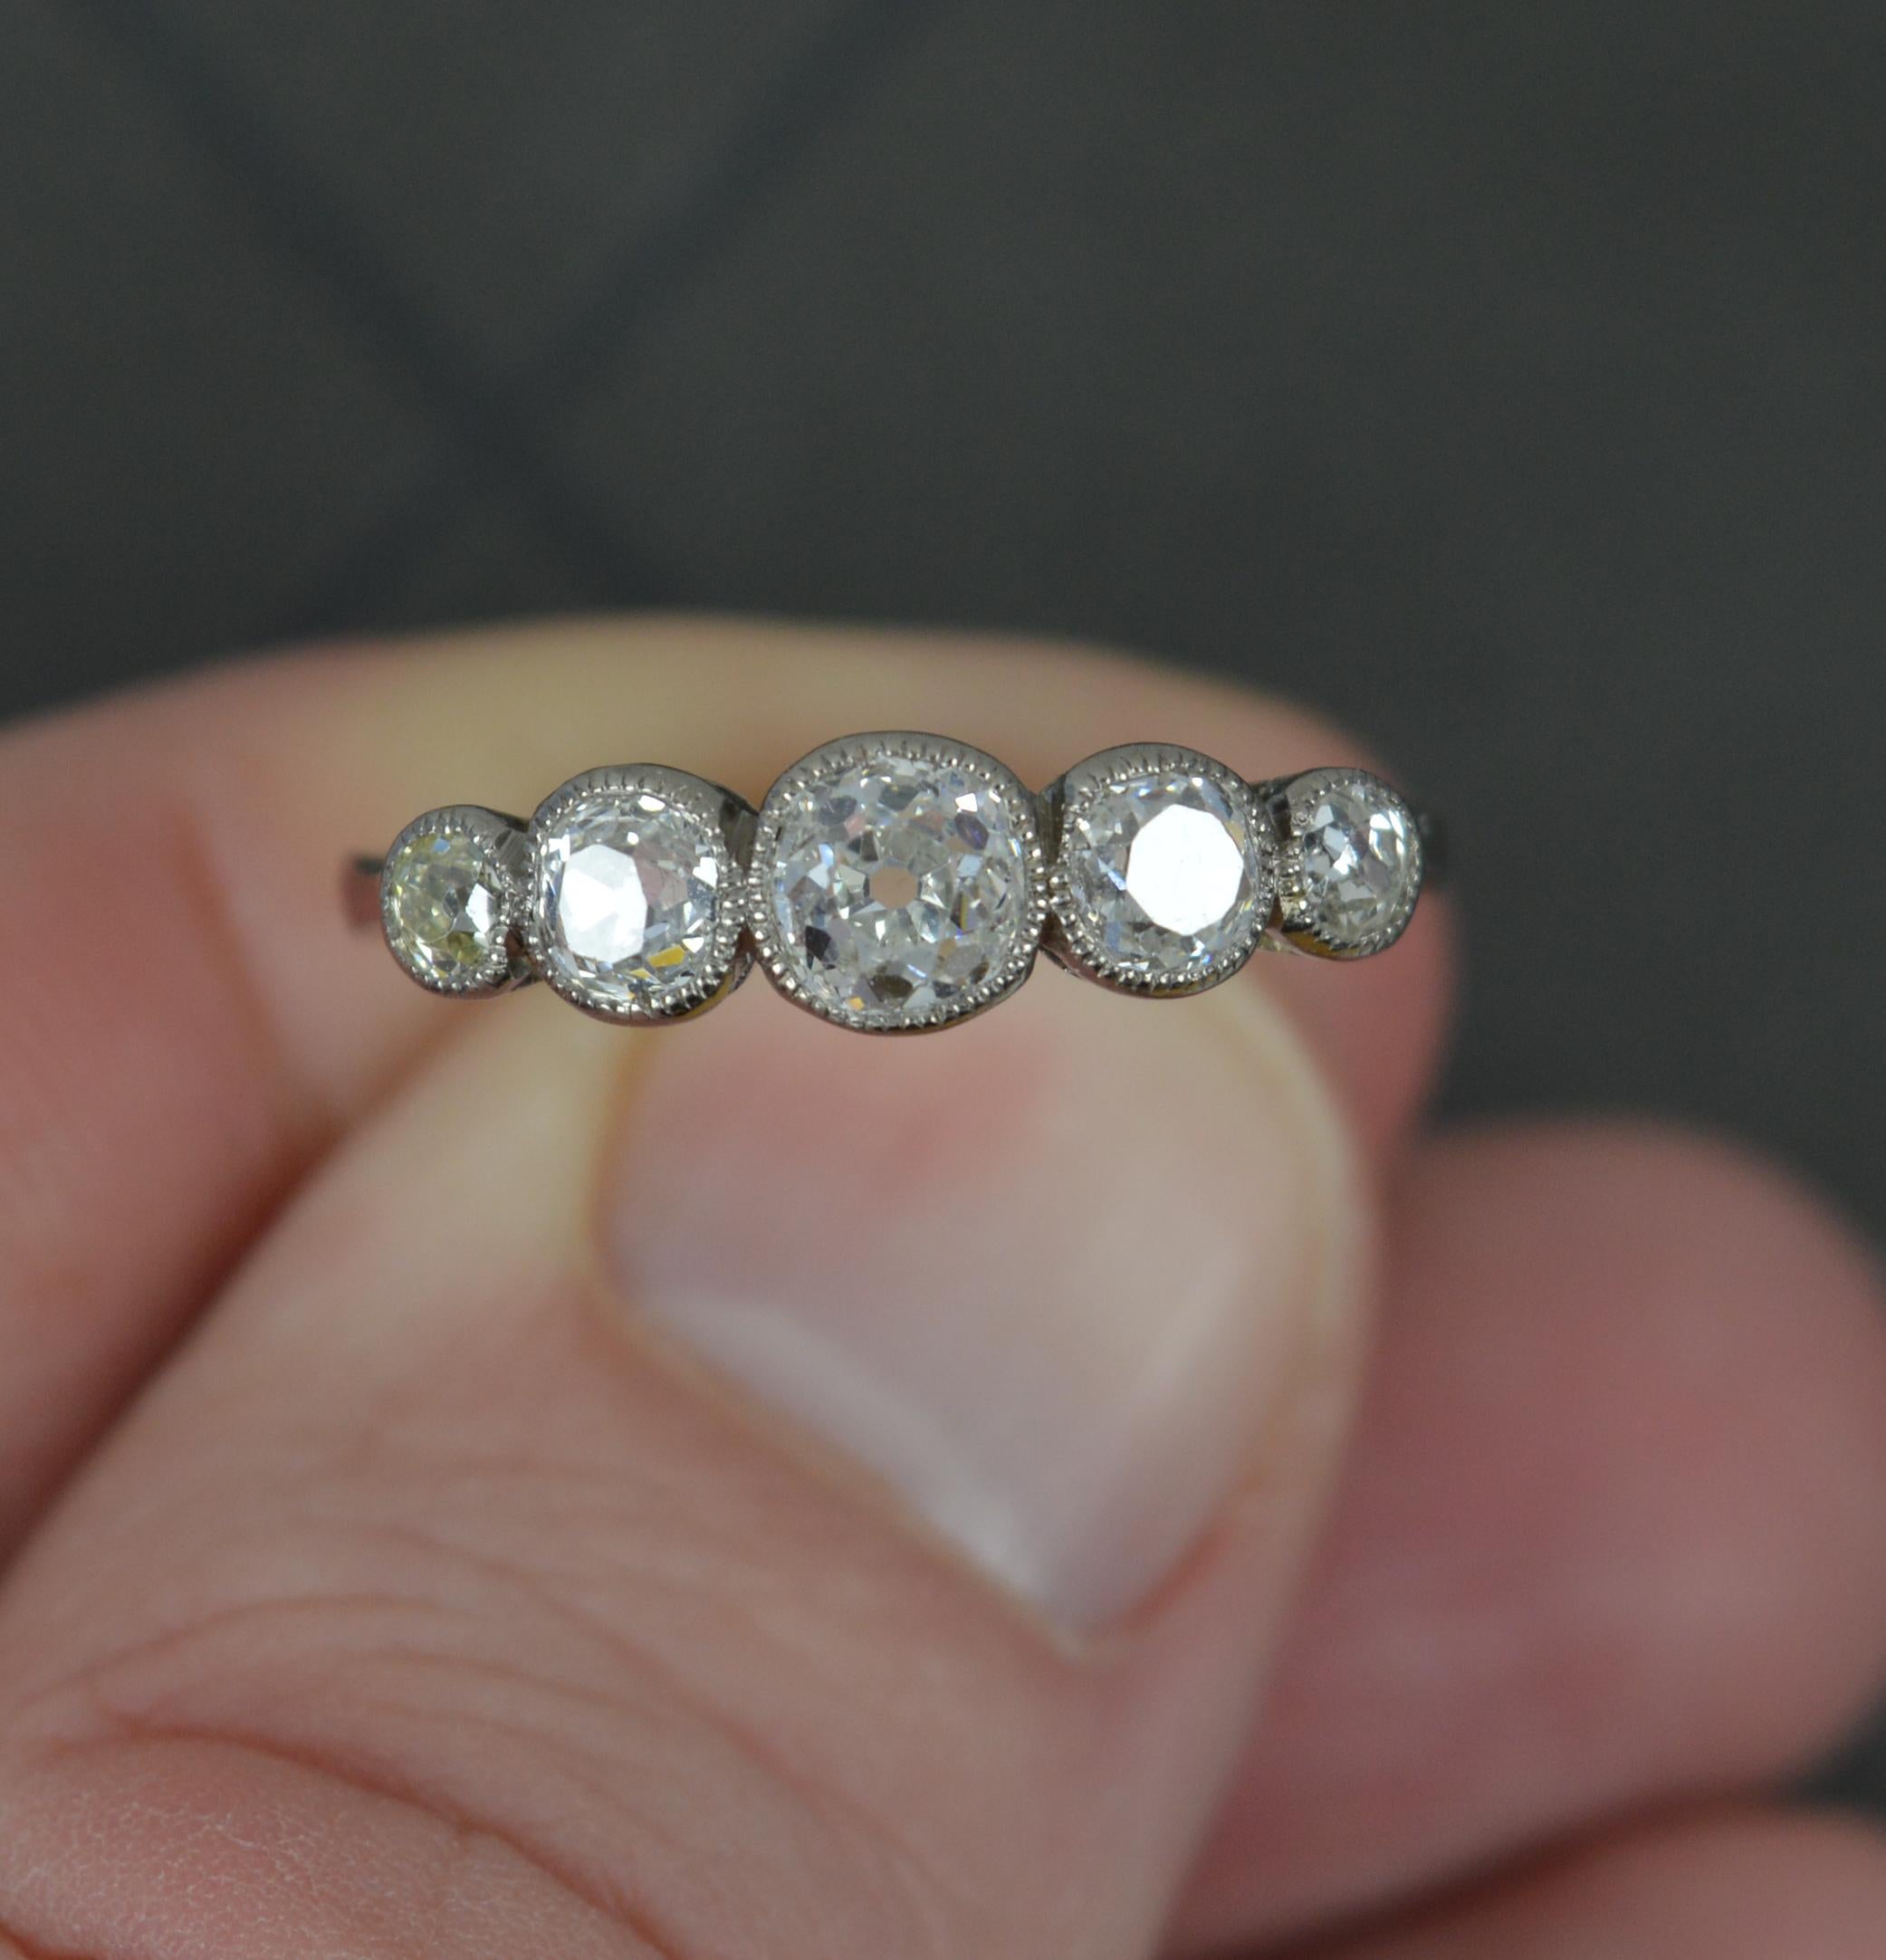 Antique 1.15ct Old Cut Diamond 18ct White Gold Bezel Five Stone Ring 1